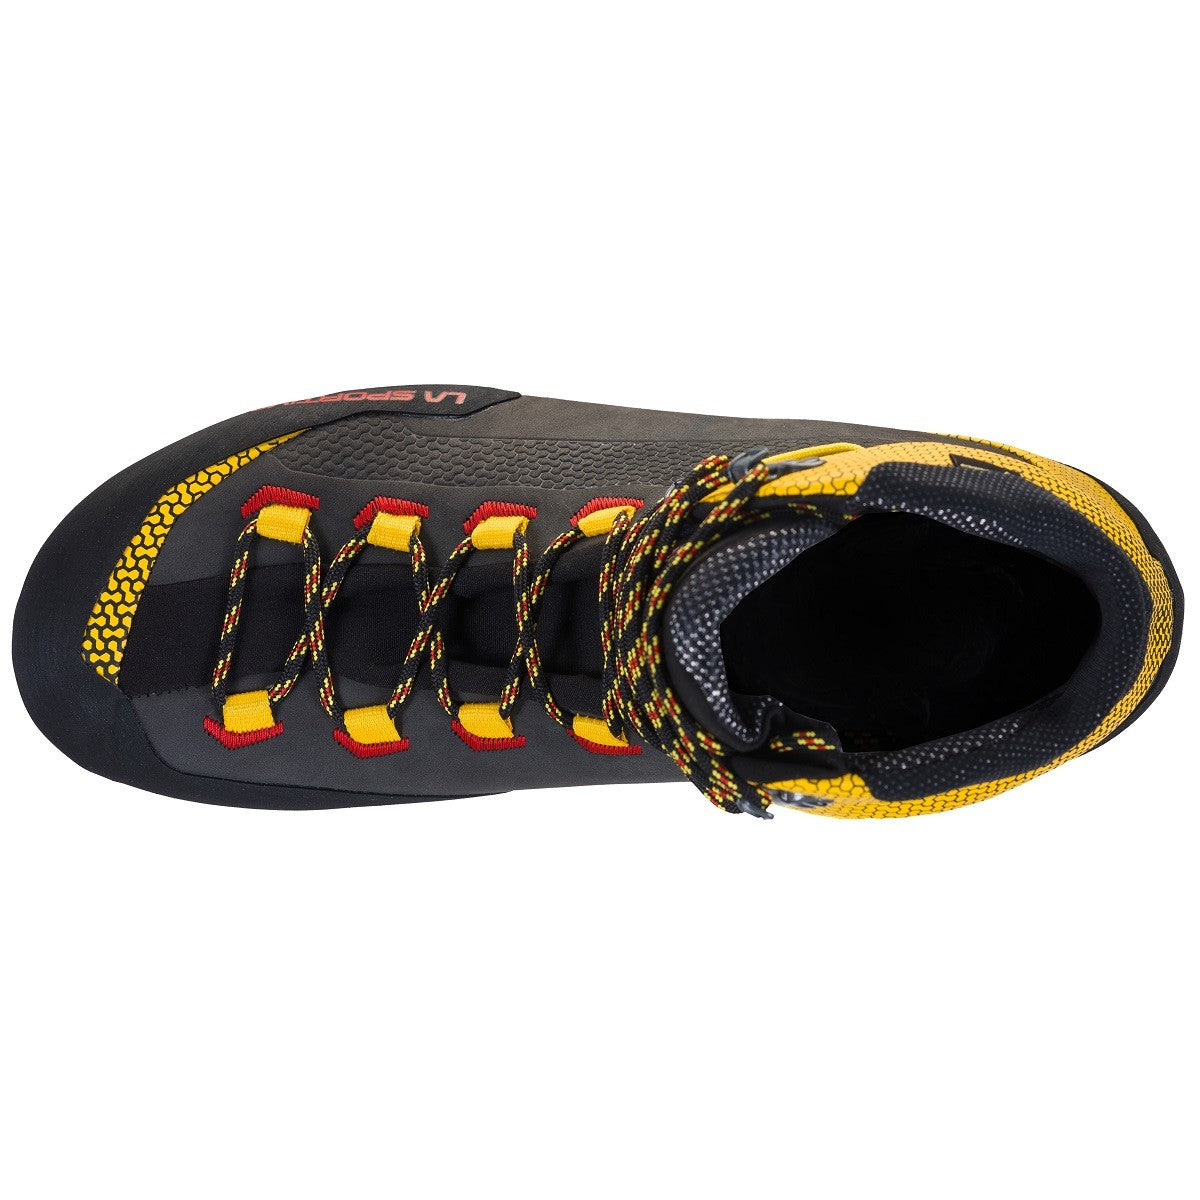 La Sportiva Trango Tech Leather GTX from above showing laces